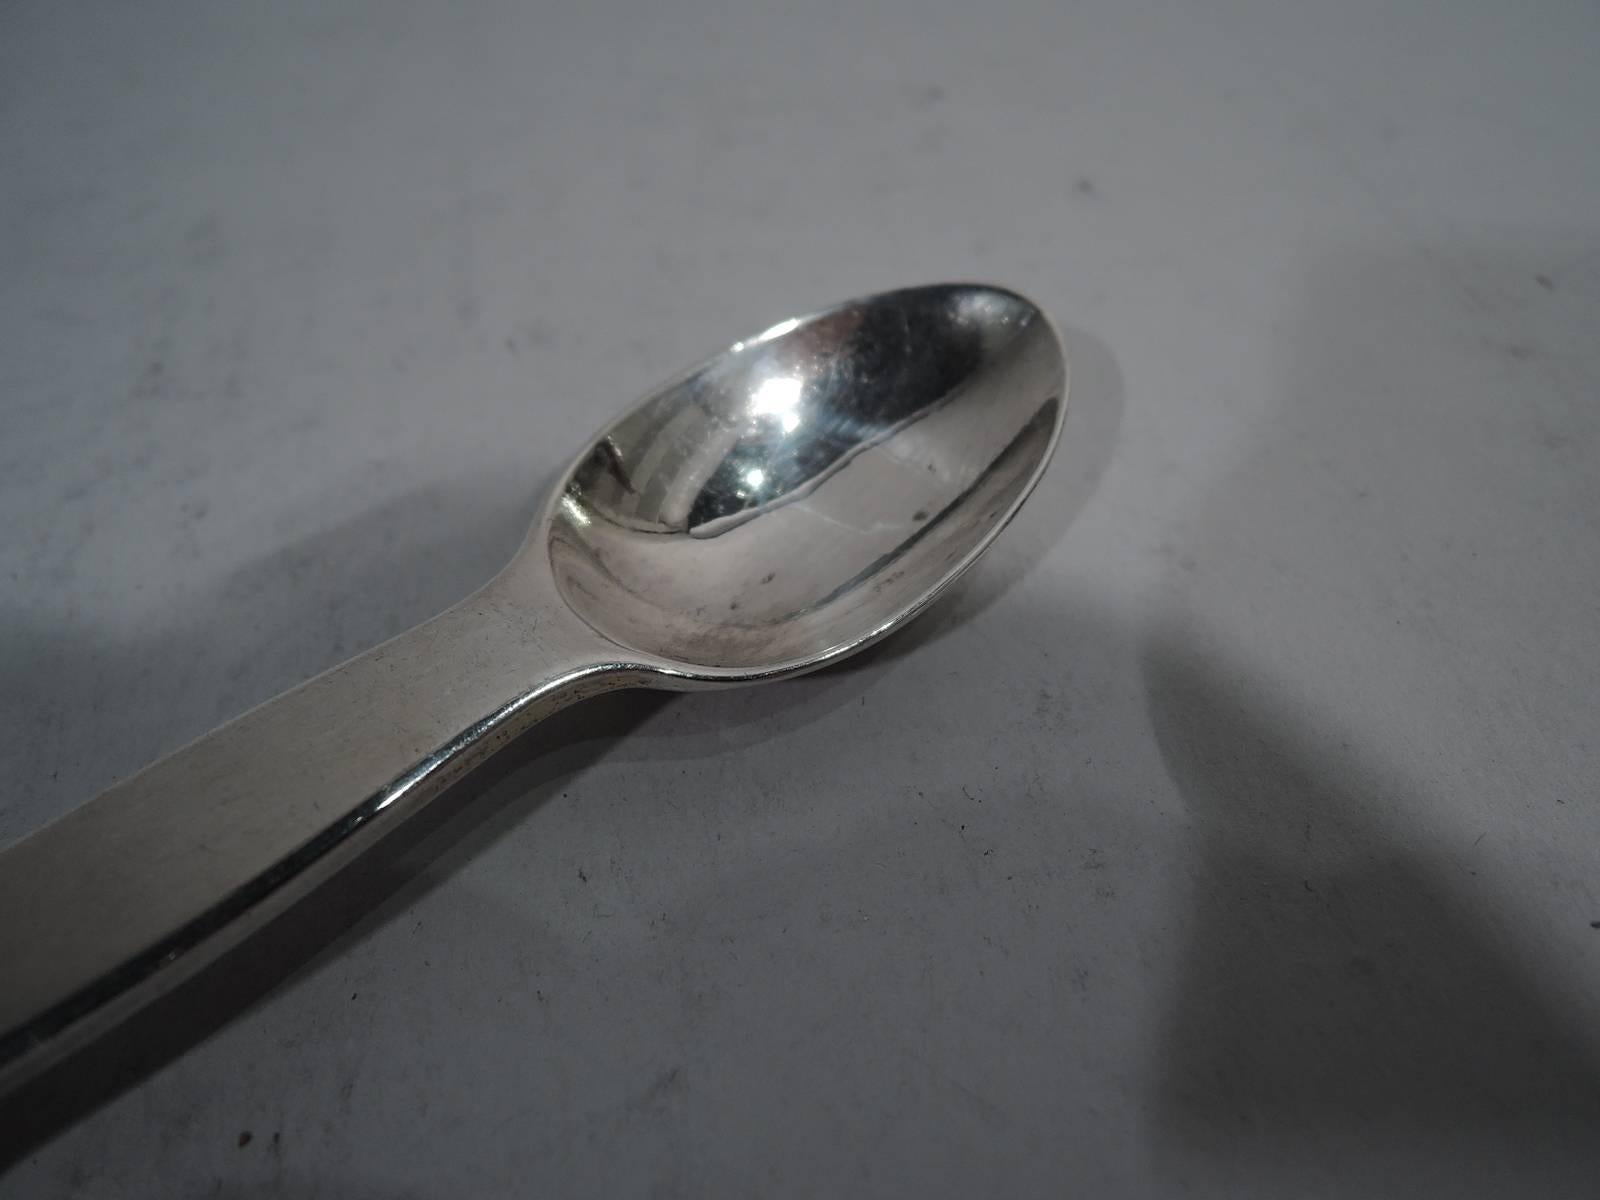 Edward VIII sterling silver medicine spoon. Made by Francis Higgins in London in 1936. Large and small bowls joined by gently curved stem. Sizes are approximately tablespoon and teaspoon. Convenient for home dosing. Hallmarked. Weight: 2 troy ounces.